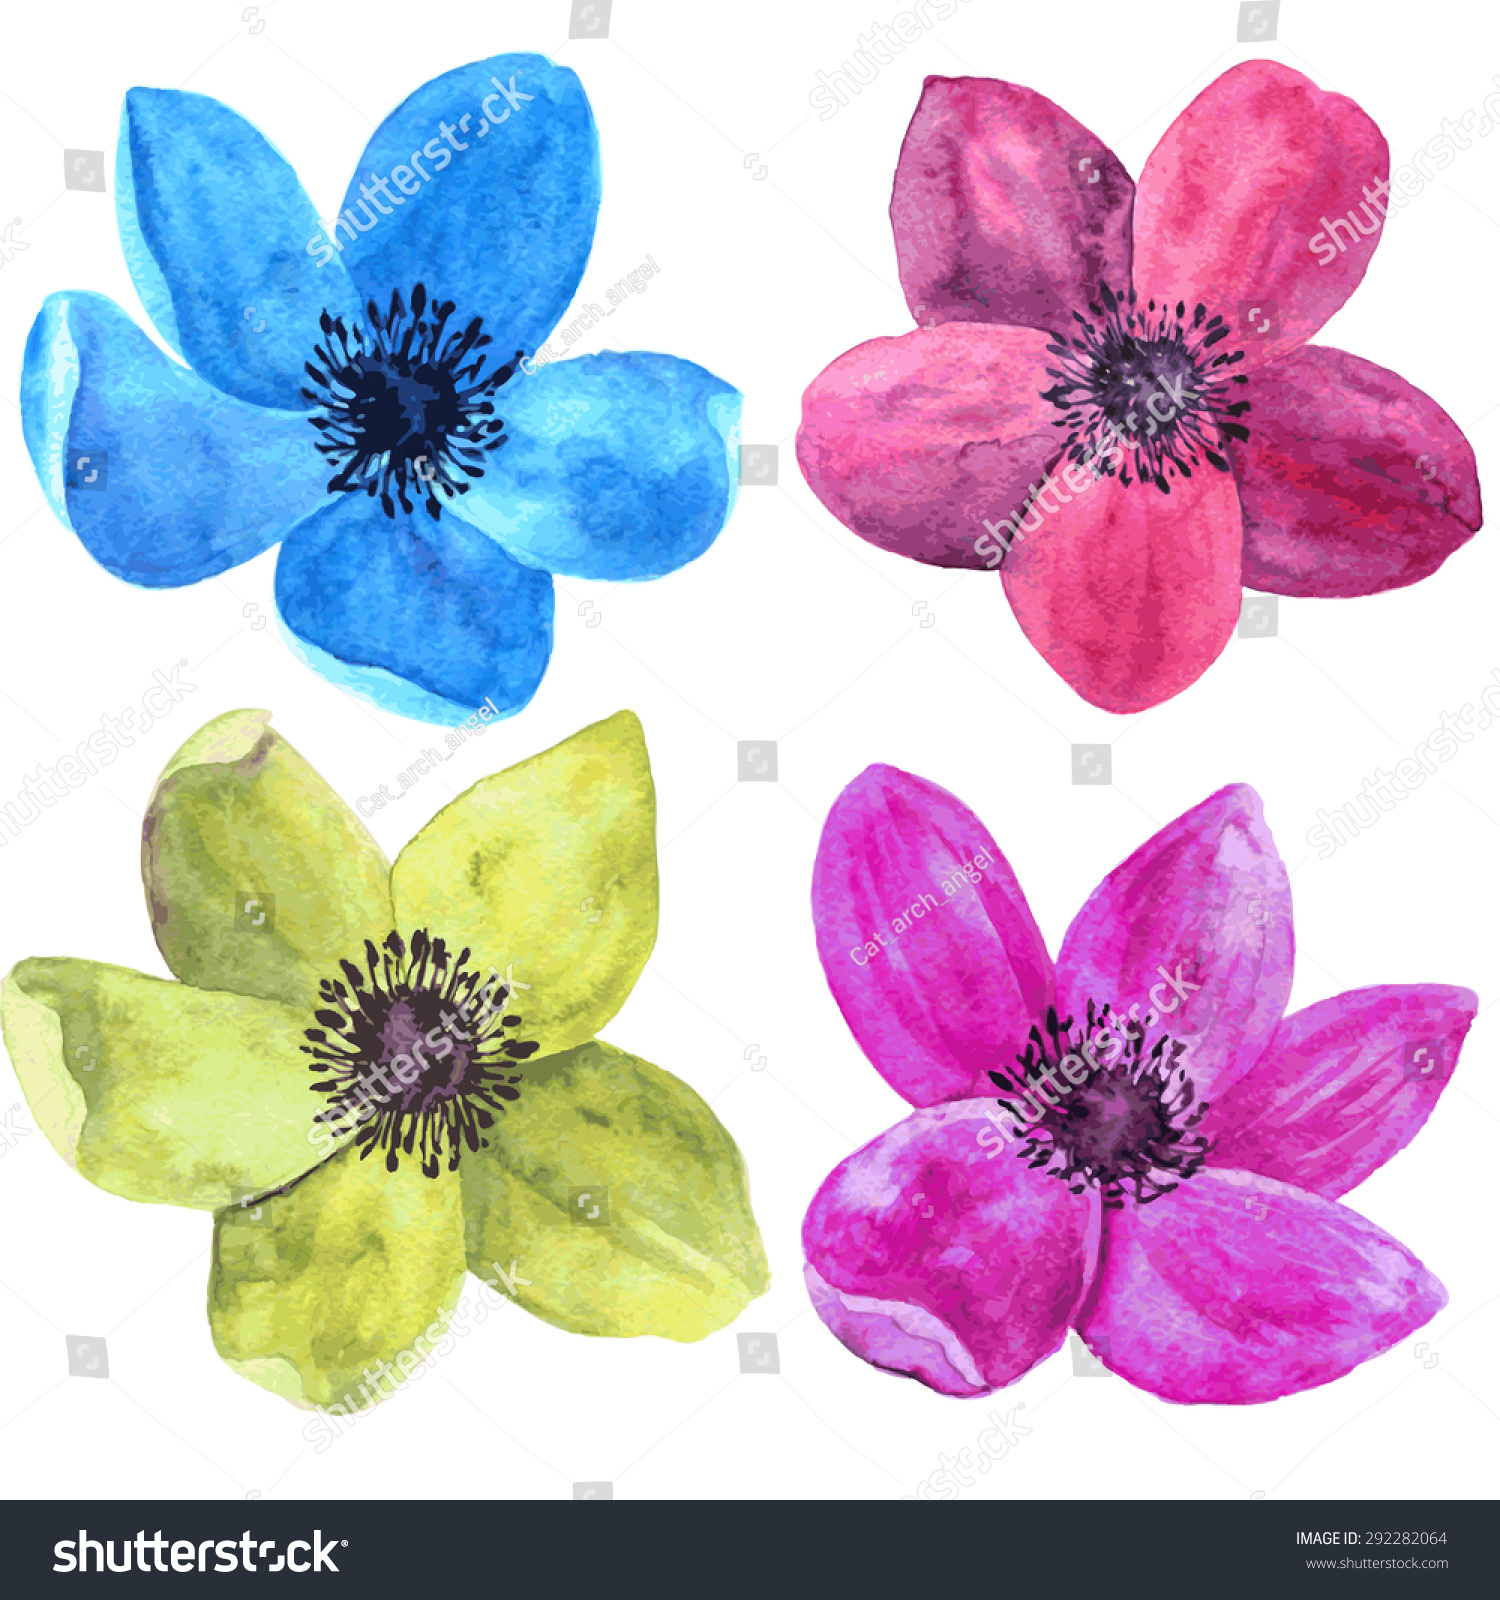 Vector Watercolor Drawing Isolated Flowers Red Stock Vector ...